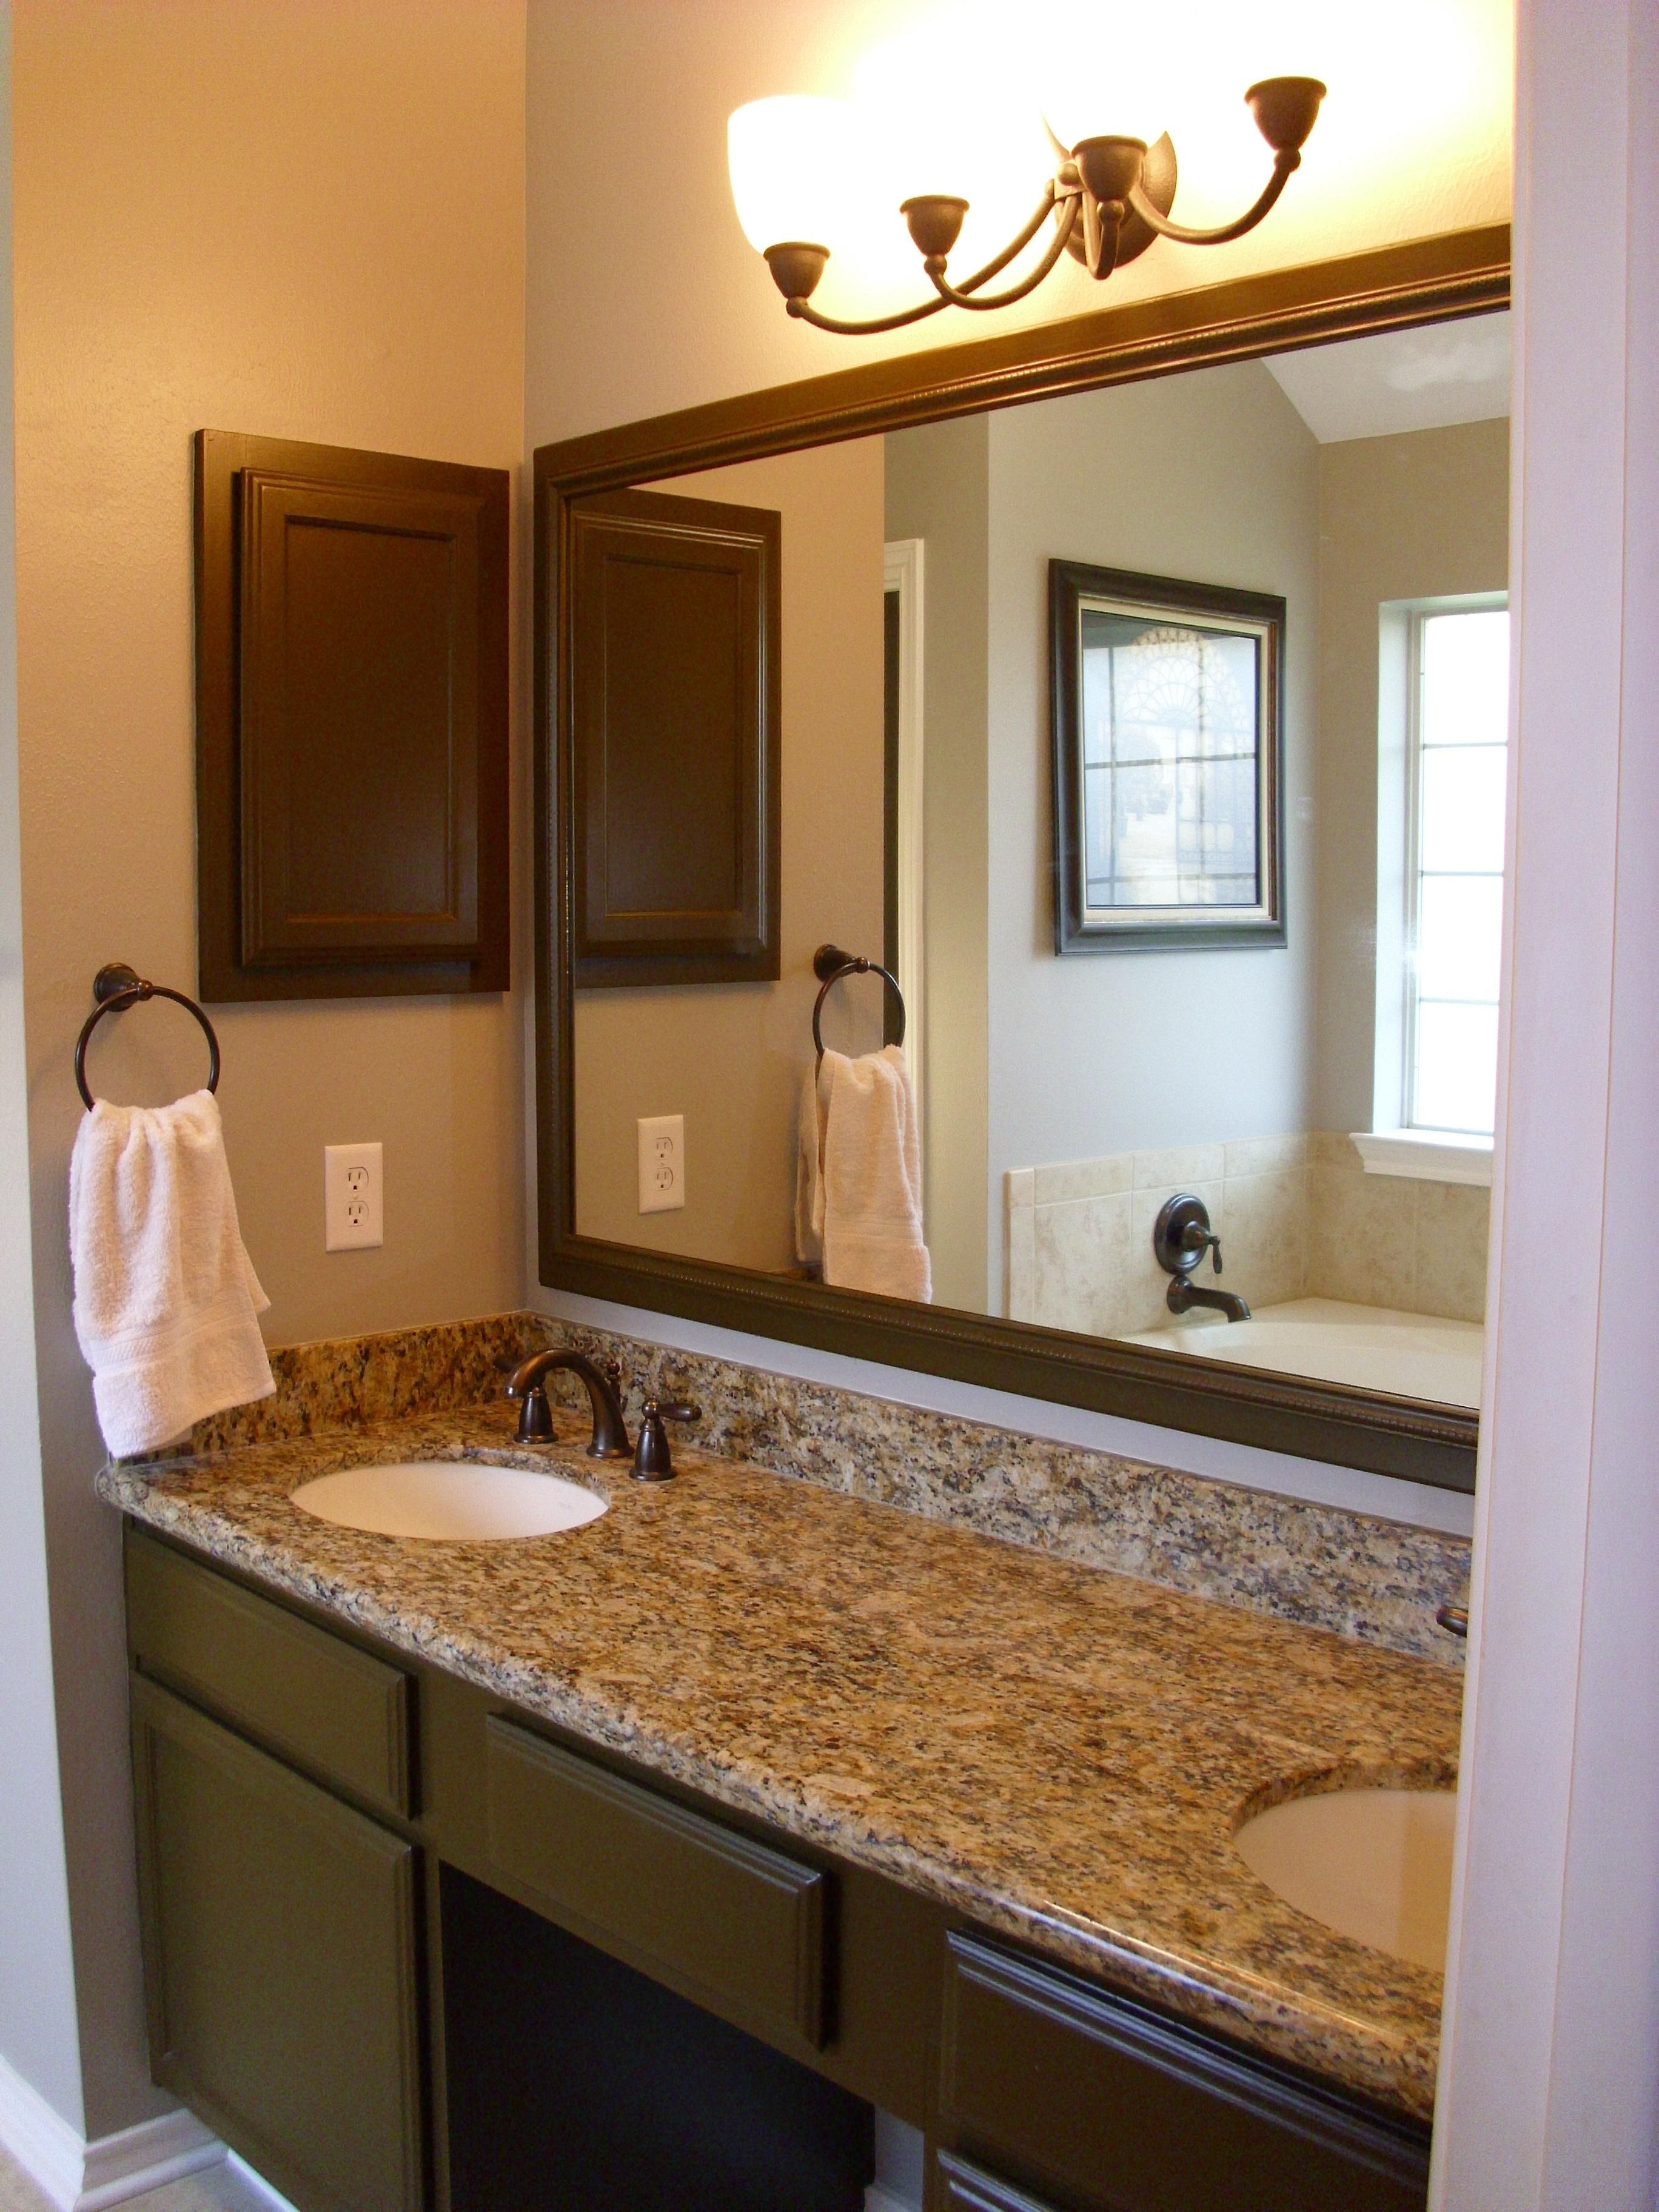 Popular Styles Of Bathroom Mirrors Ideas With Vanity | Free Inside Bathroom Mirrors Ideas With Vanity (View 3 of 20)